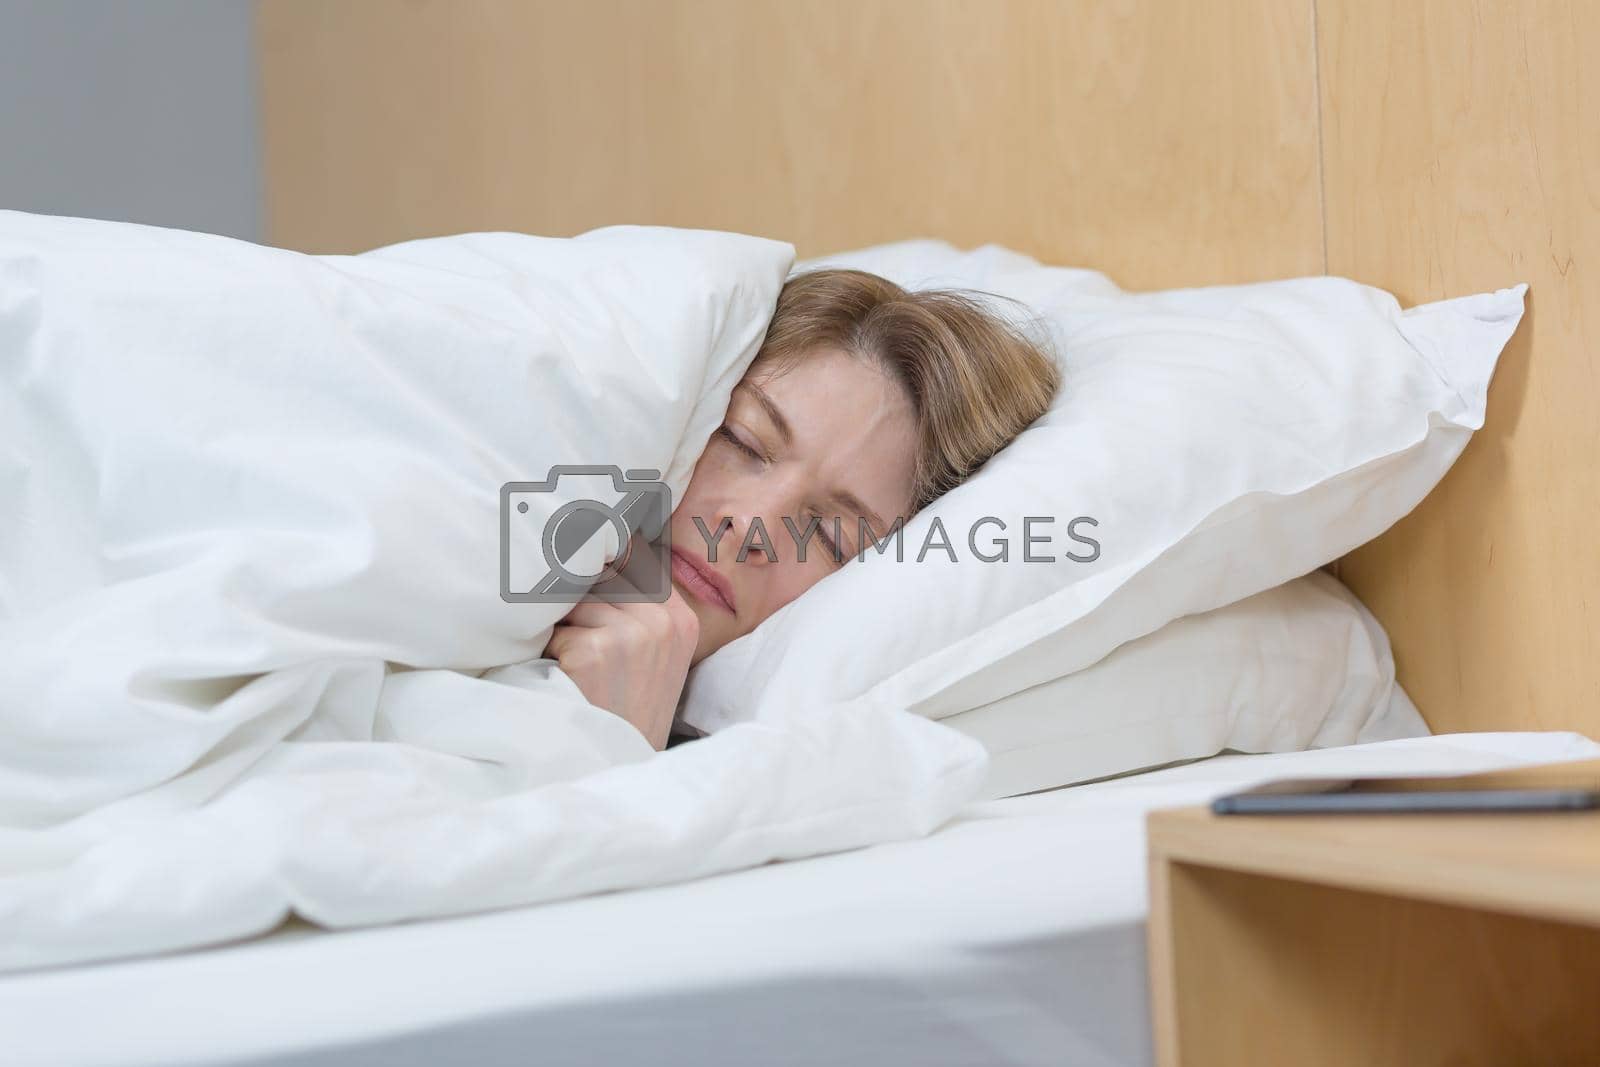 Royalty free image of Close-up photo of a sleepless and upset woman lying in bed under a blanket, trying to fall asleep by voronaman